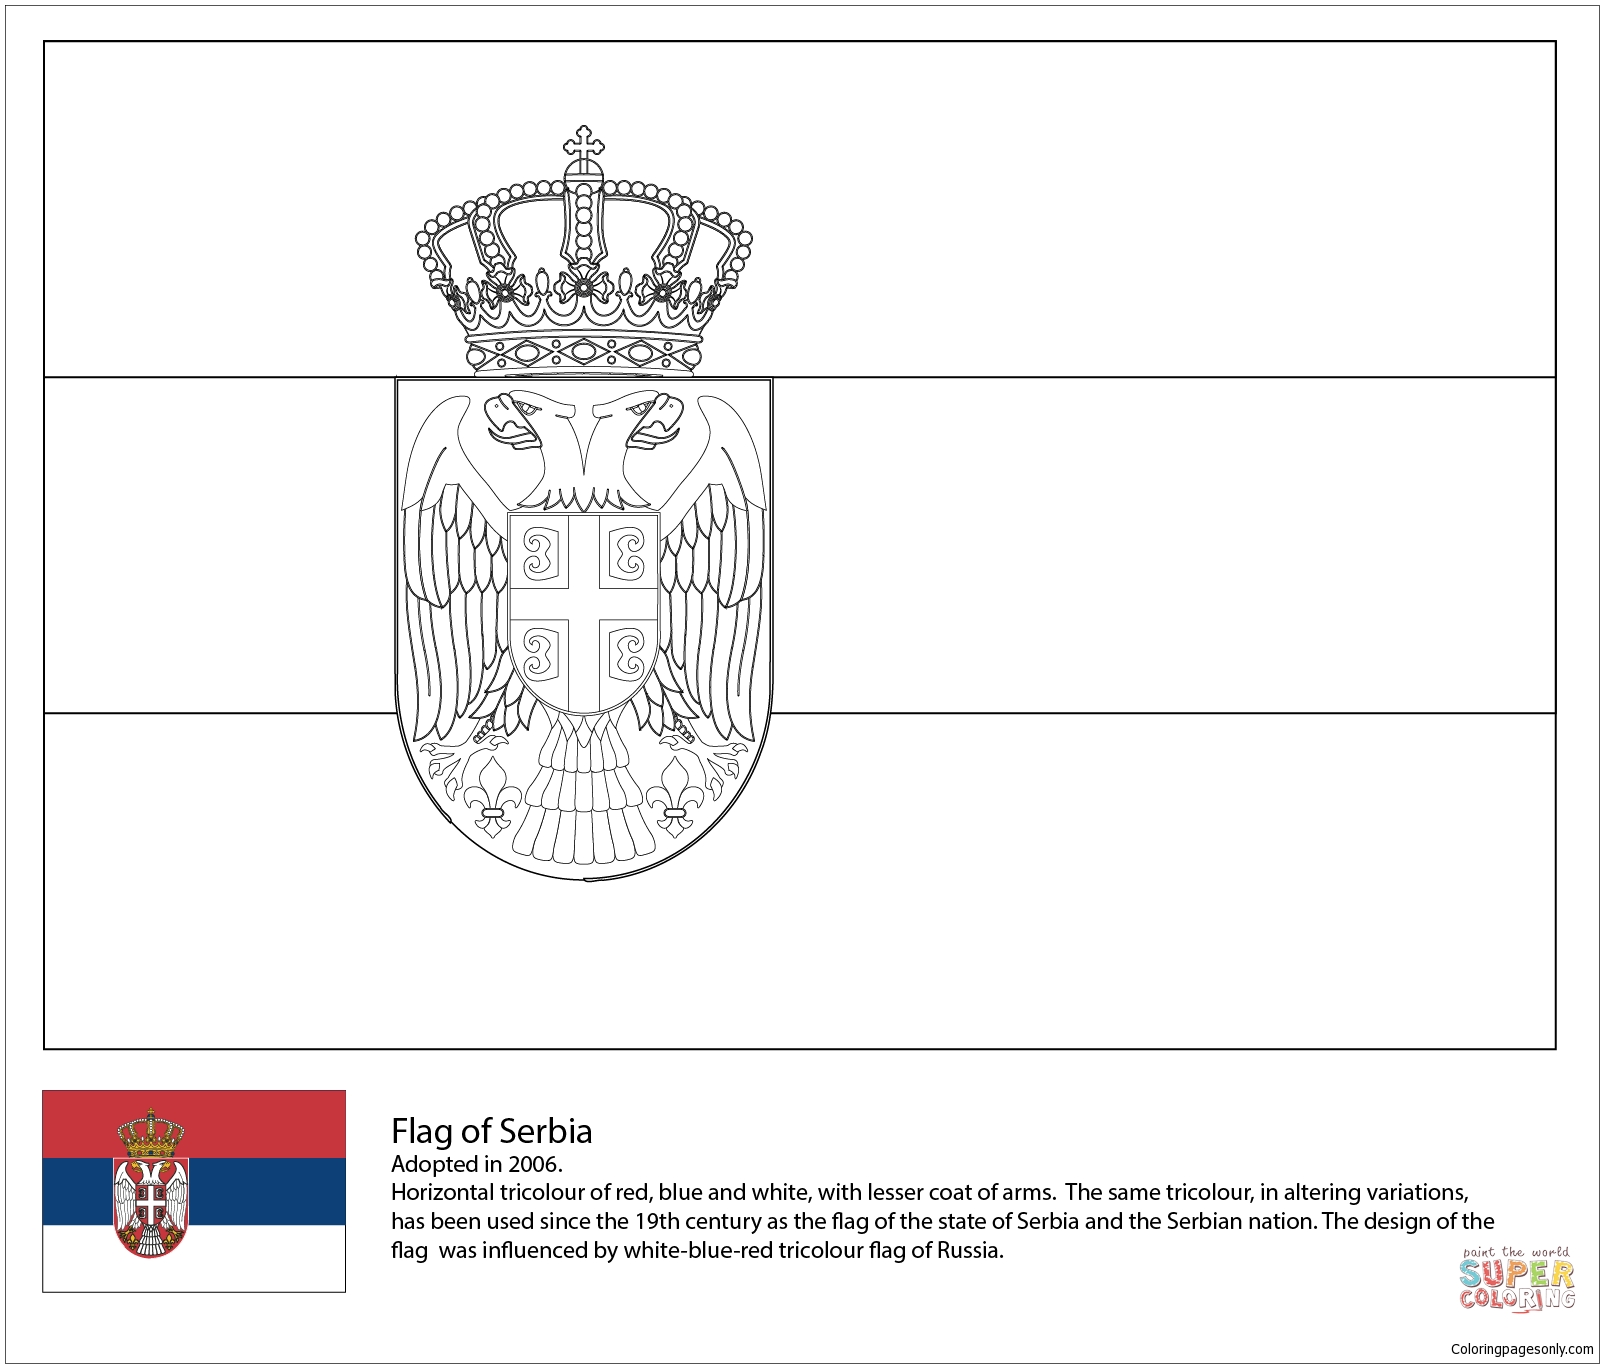 Download Flag of Serbia-World Cup 2018 Coloring Page - Free Coloring Pages Online